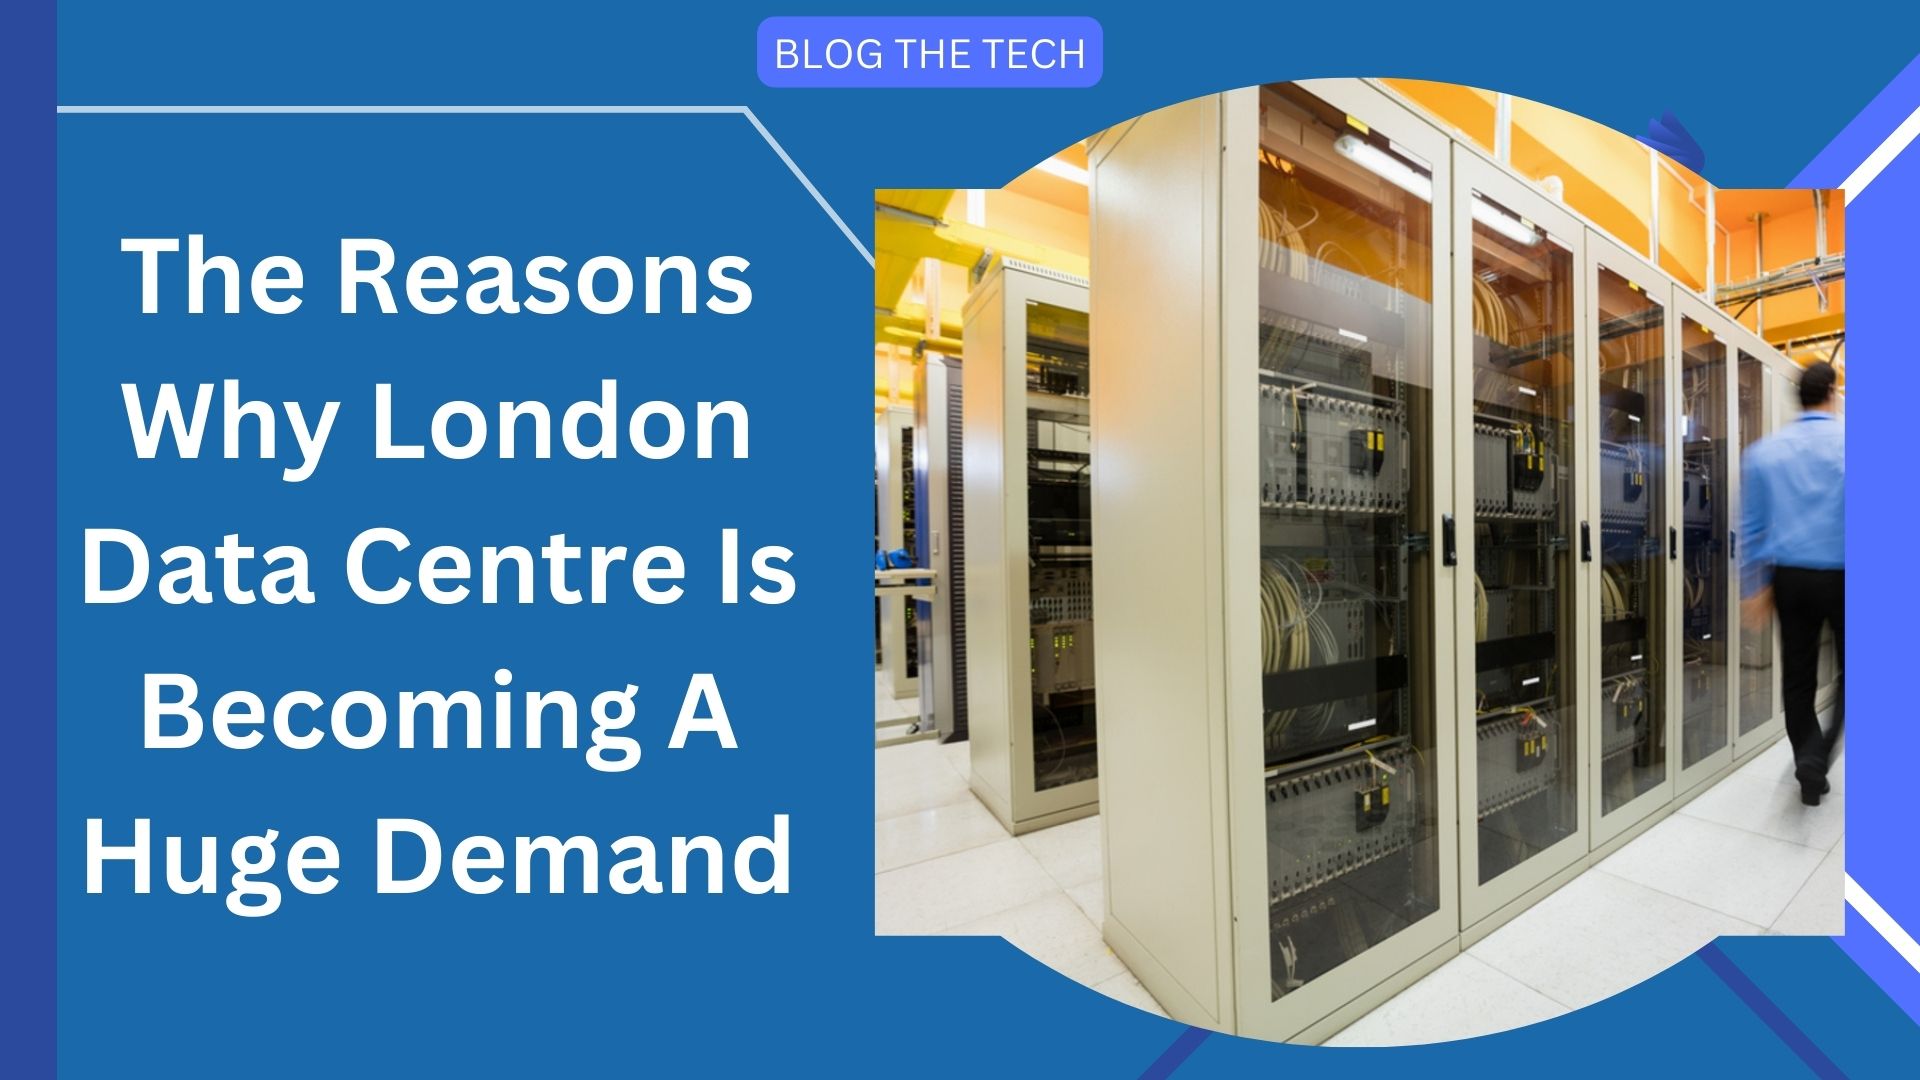 The Reasons Why London Data Centre Is Becoming A Huge Demand